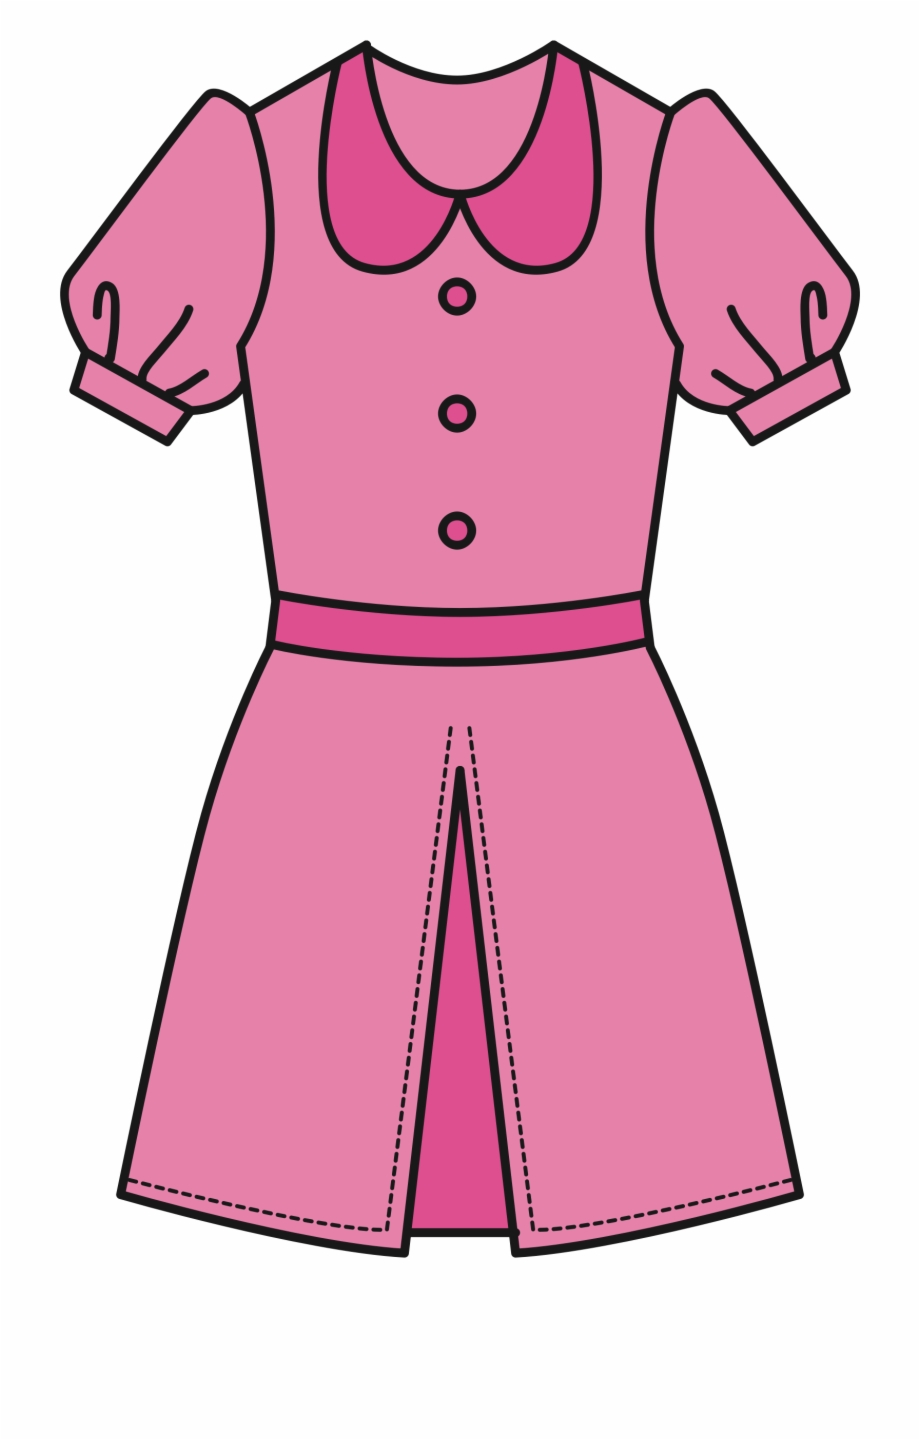 Pink Big Image Png Dress Pictures Clip Art - Clip Art Library